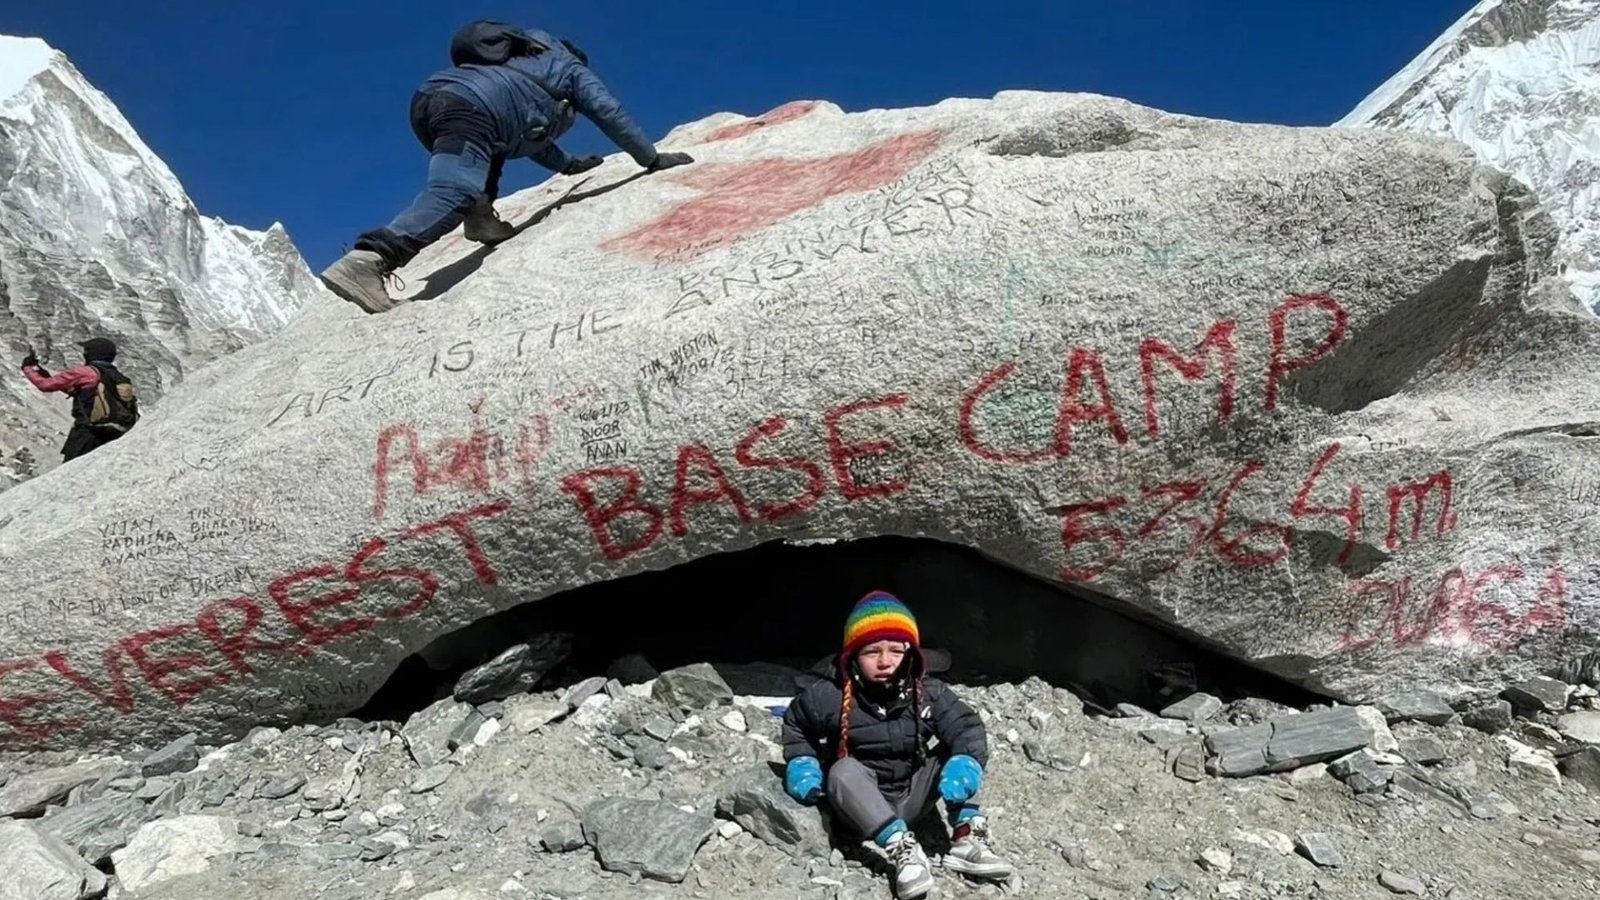 Intrepid Brit boy 2 becomes youngest person to reach Everest base camp